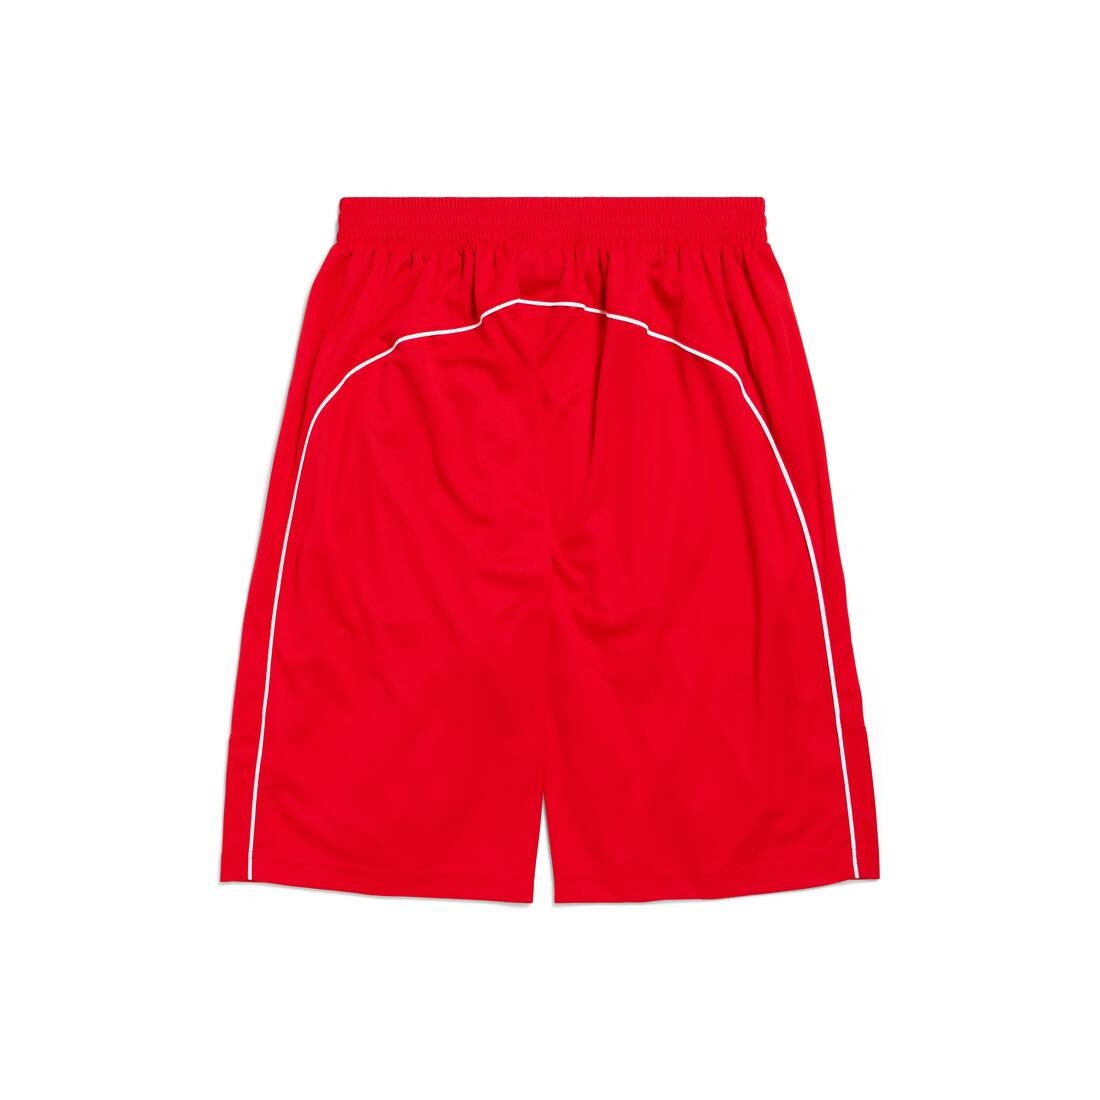 Soccer Baggy Shorts in Red/white - 6